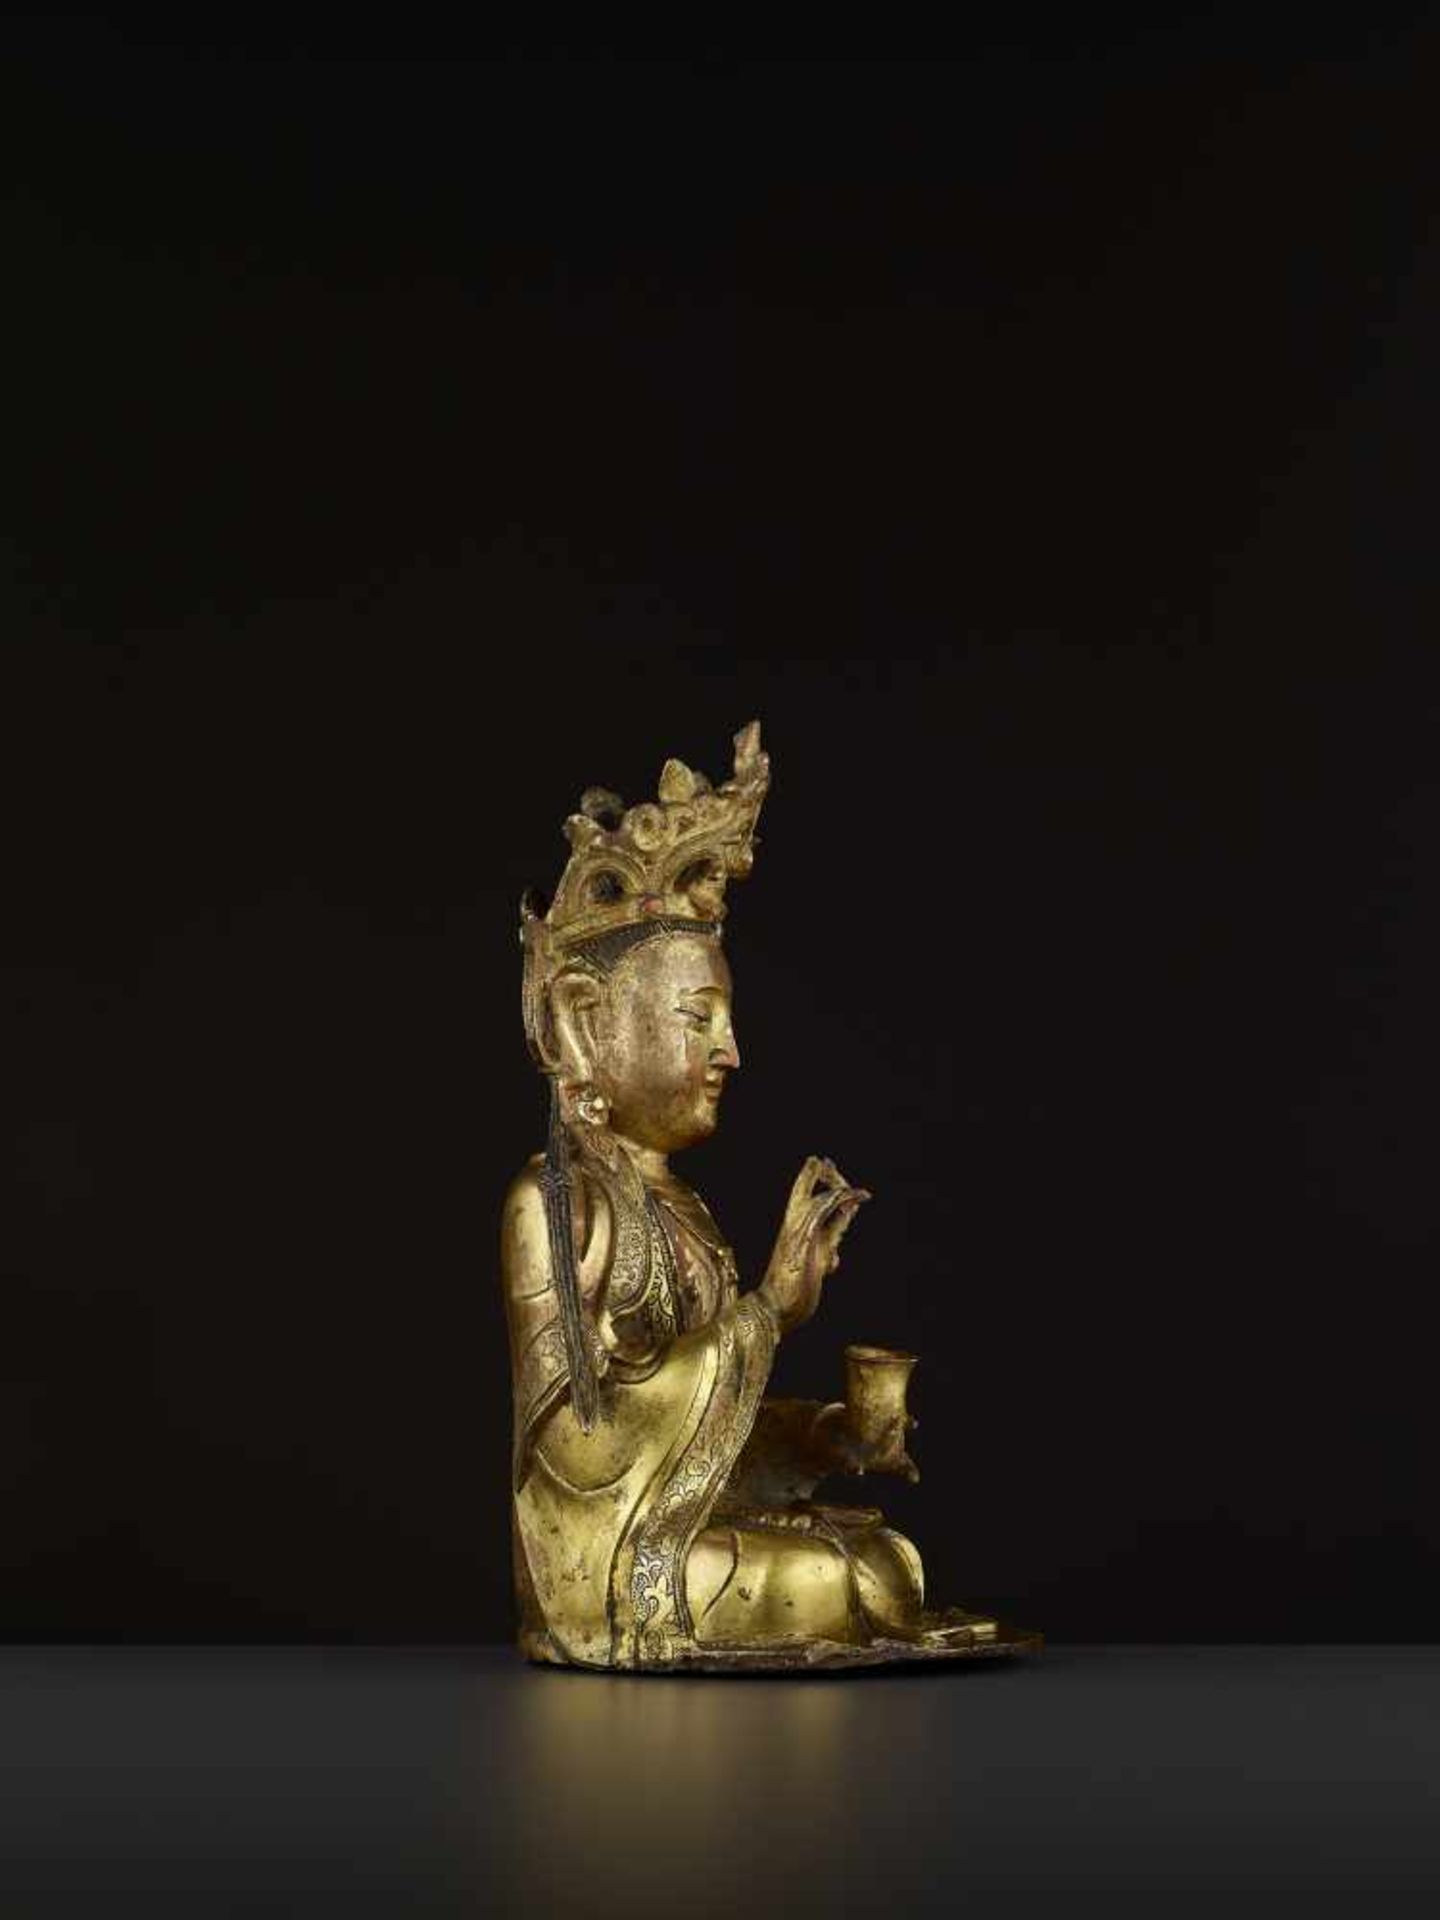 A FINELY CAST GILT-BRONZE FIGURE OF GUANYIN, MING DYNASTY China, 16th-17th century. The figure is - Image 7 of 10